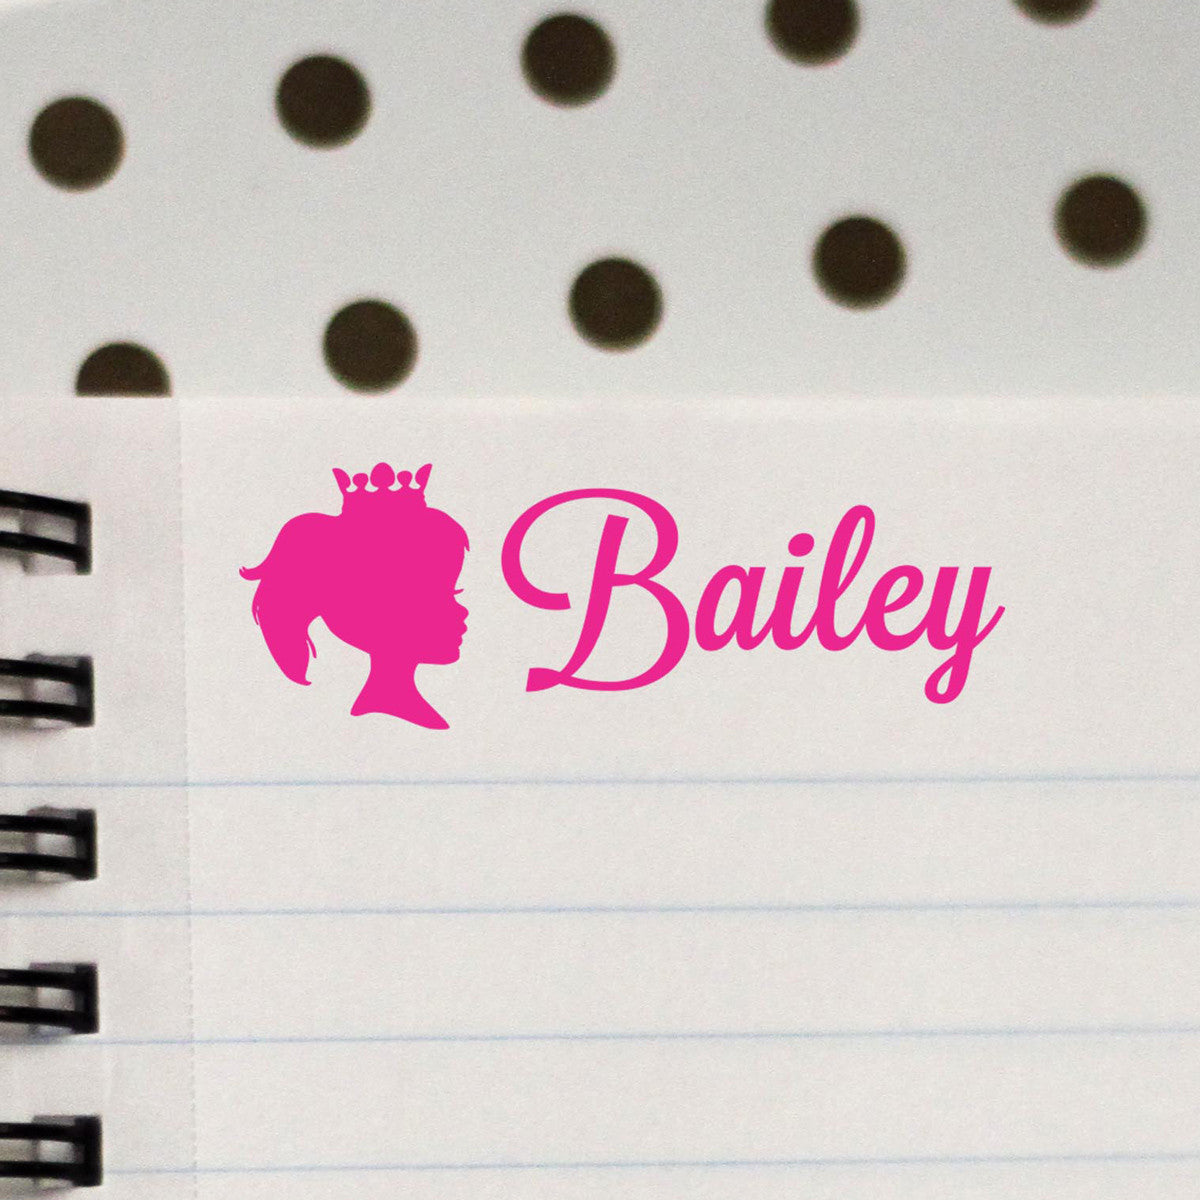 Personalized Kids Name Stamp - Bailey Princess